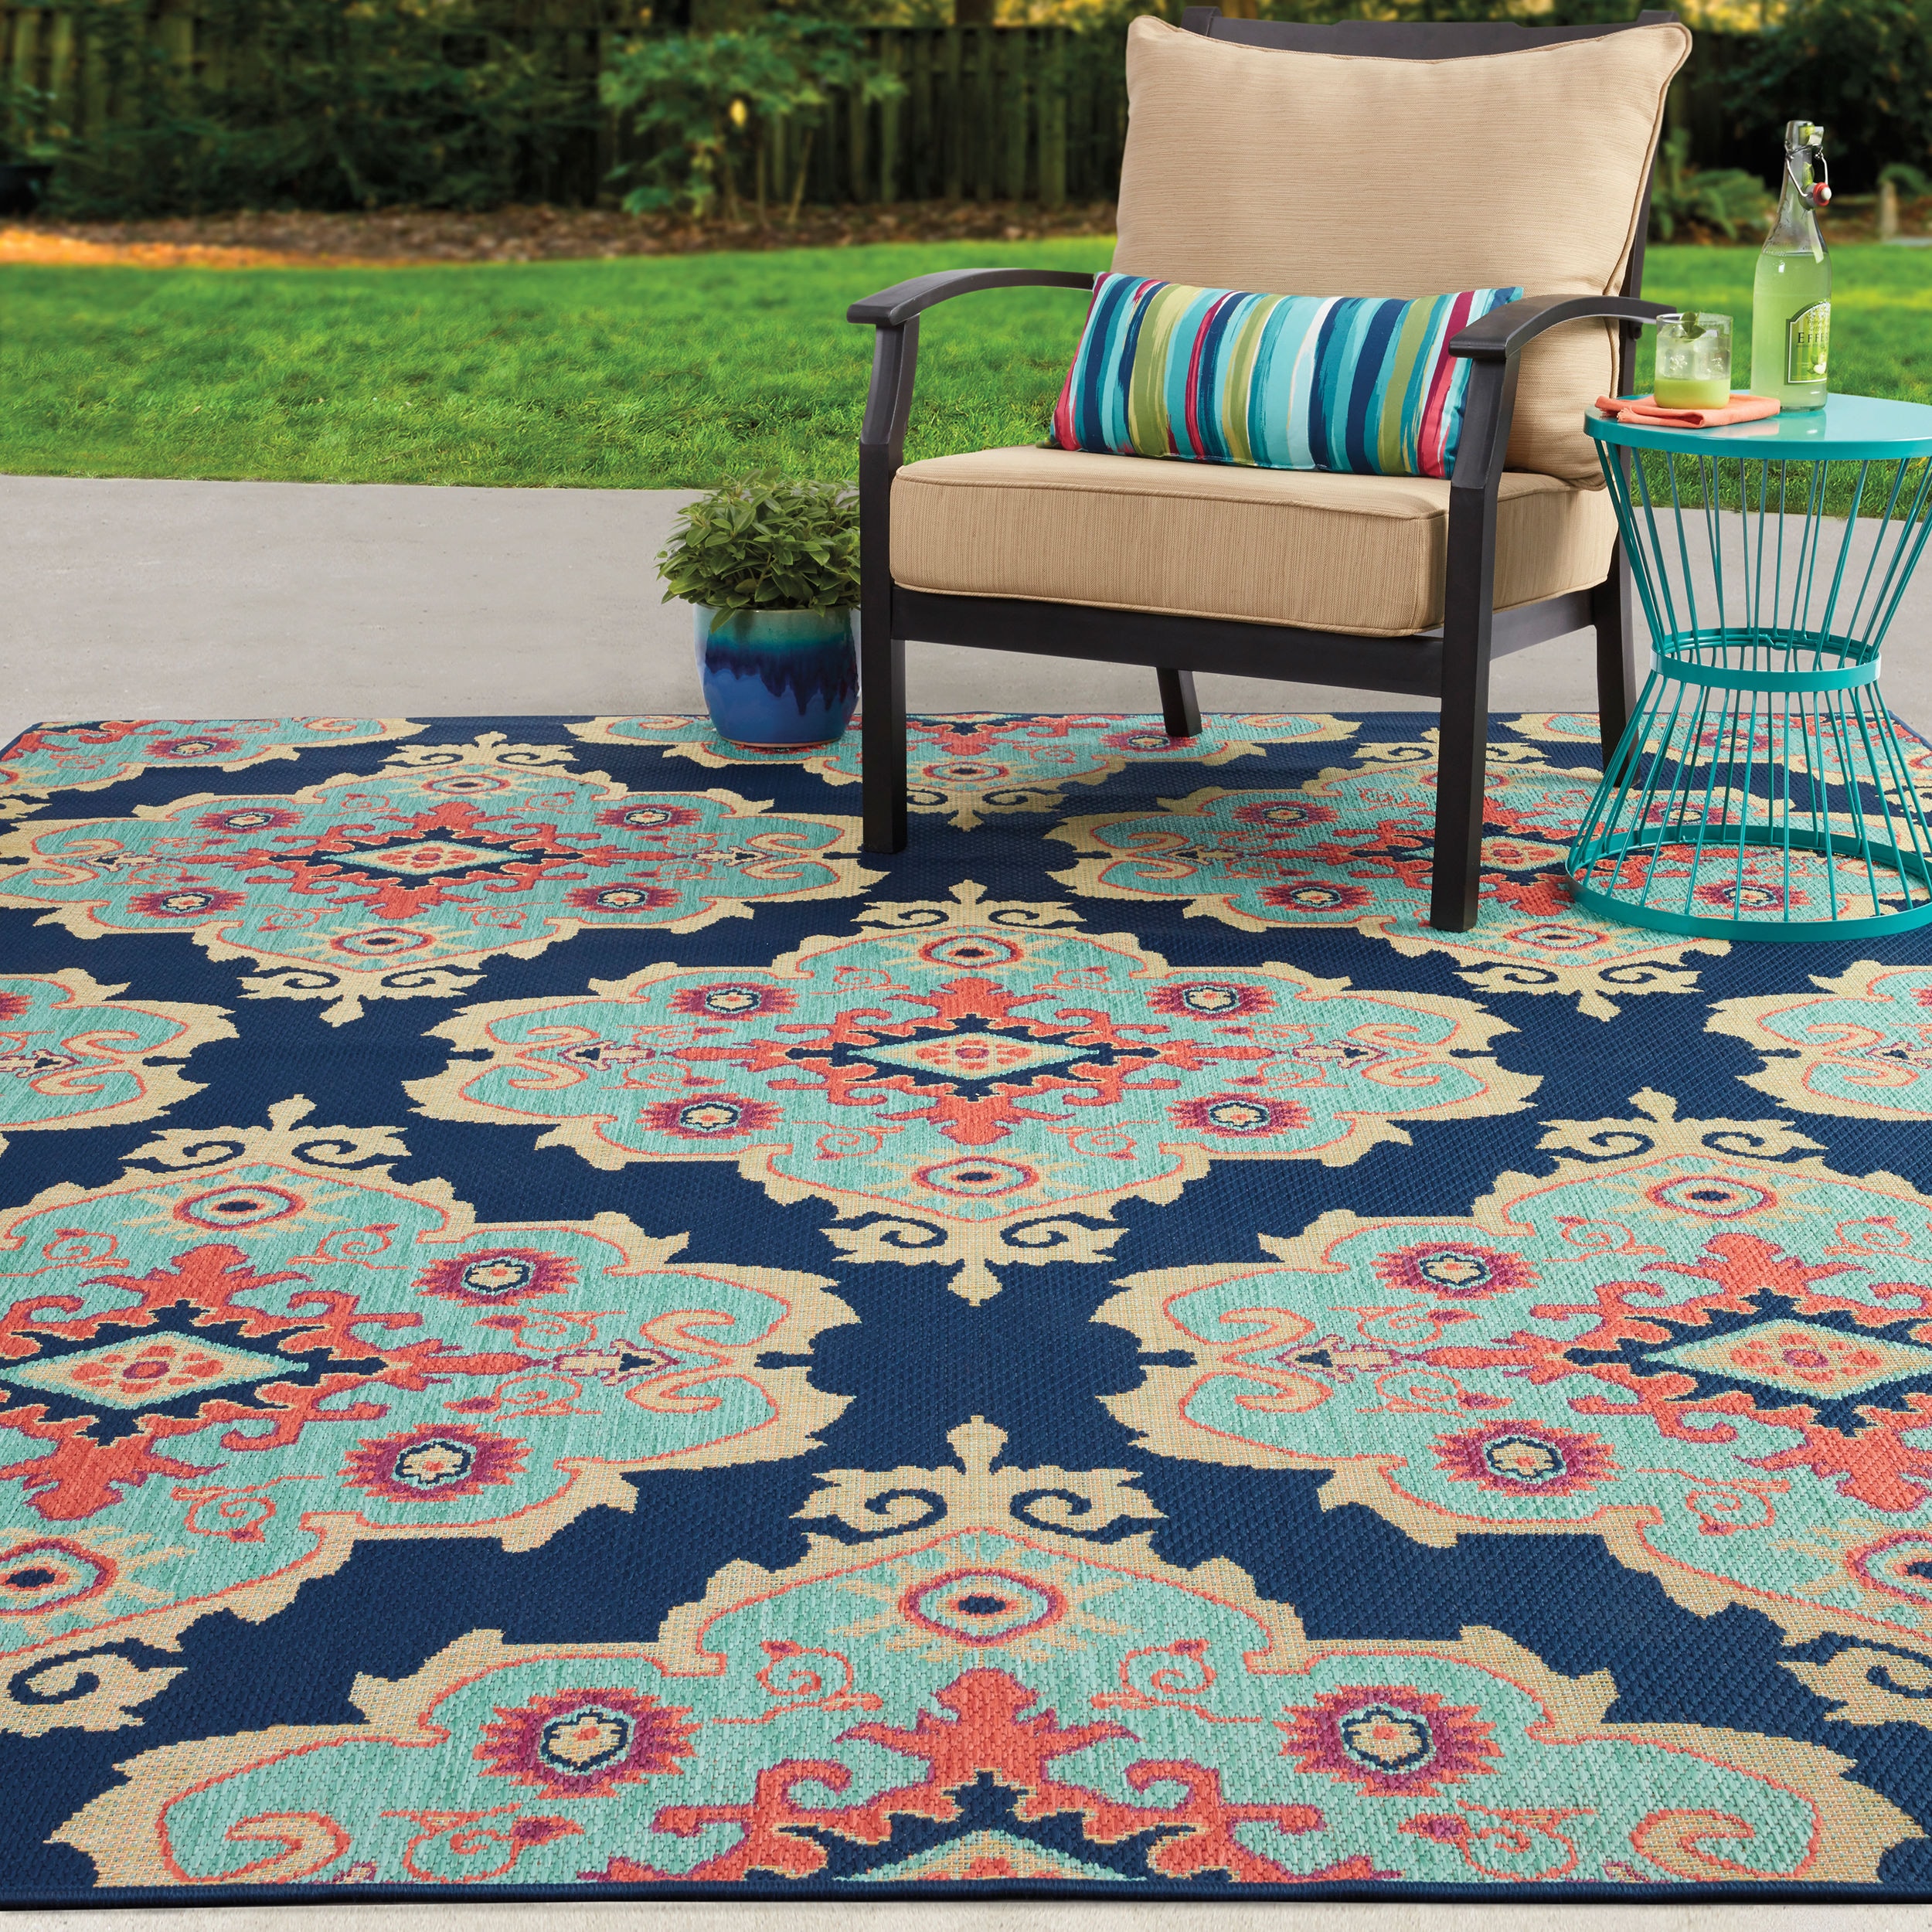 RUGS AREA RUGS 8x10 OUTDOOR RUGS INDOOR OUTDOOR CARPET PATIO LARGE KITCHEN RUGS 